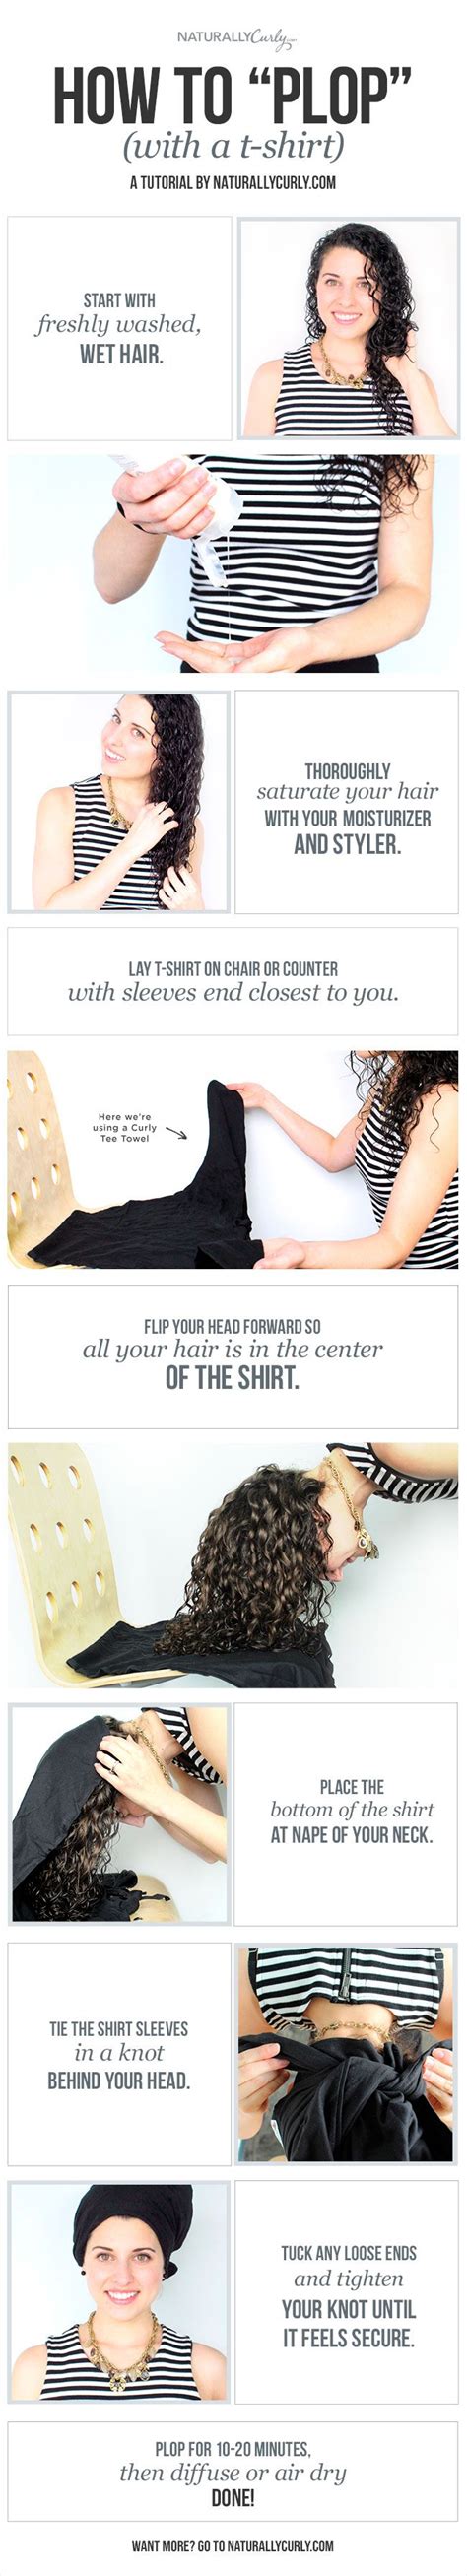 curly hair series plopping the ultimate guide suit your look